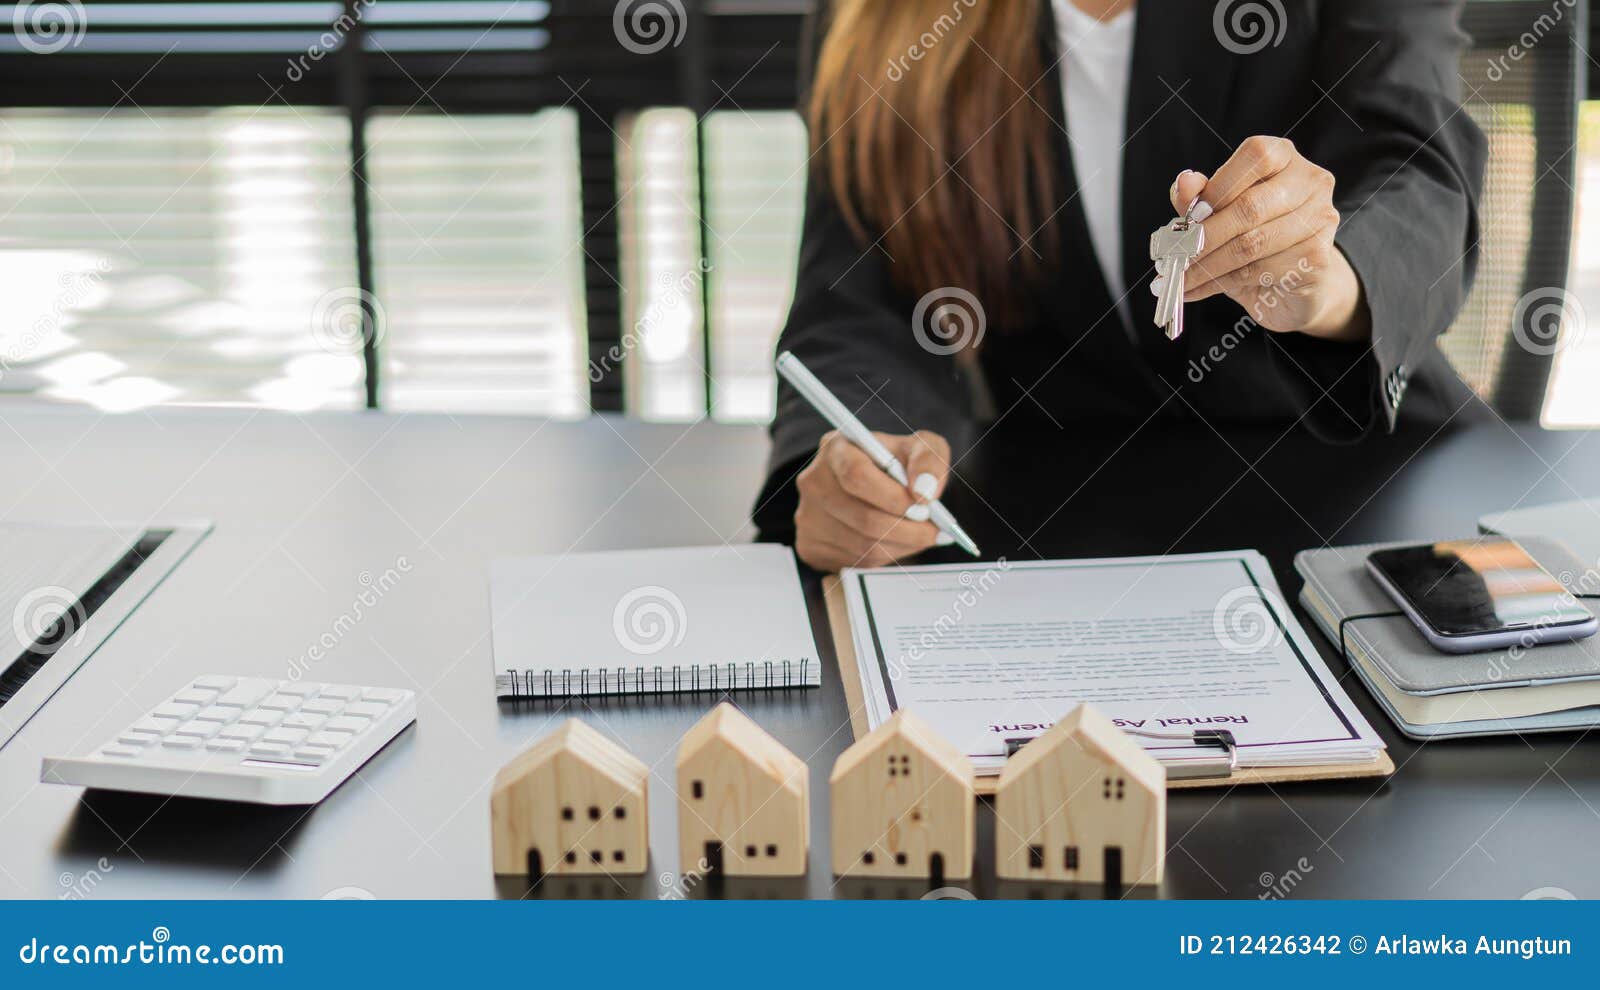 real estate agents and borrowing, debt contracts and housing investments. loan agreement for investors or buyers to sign for bank